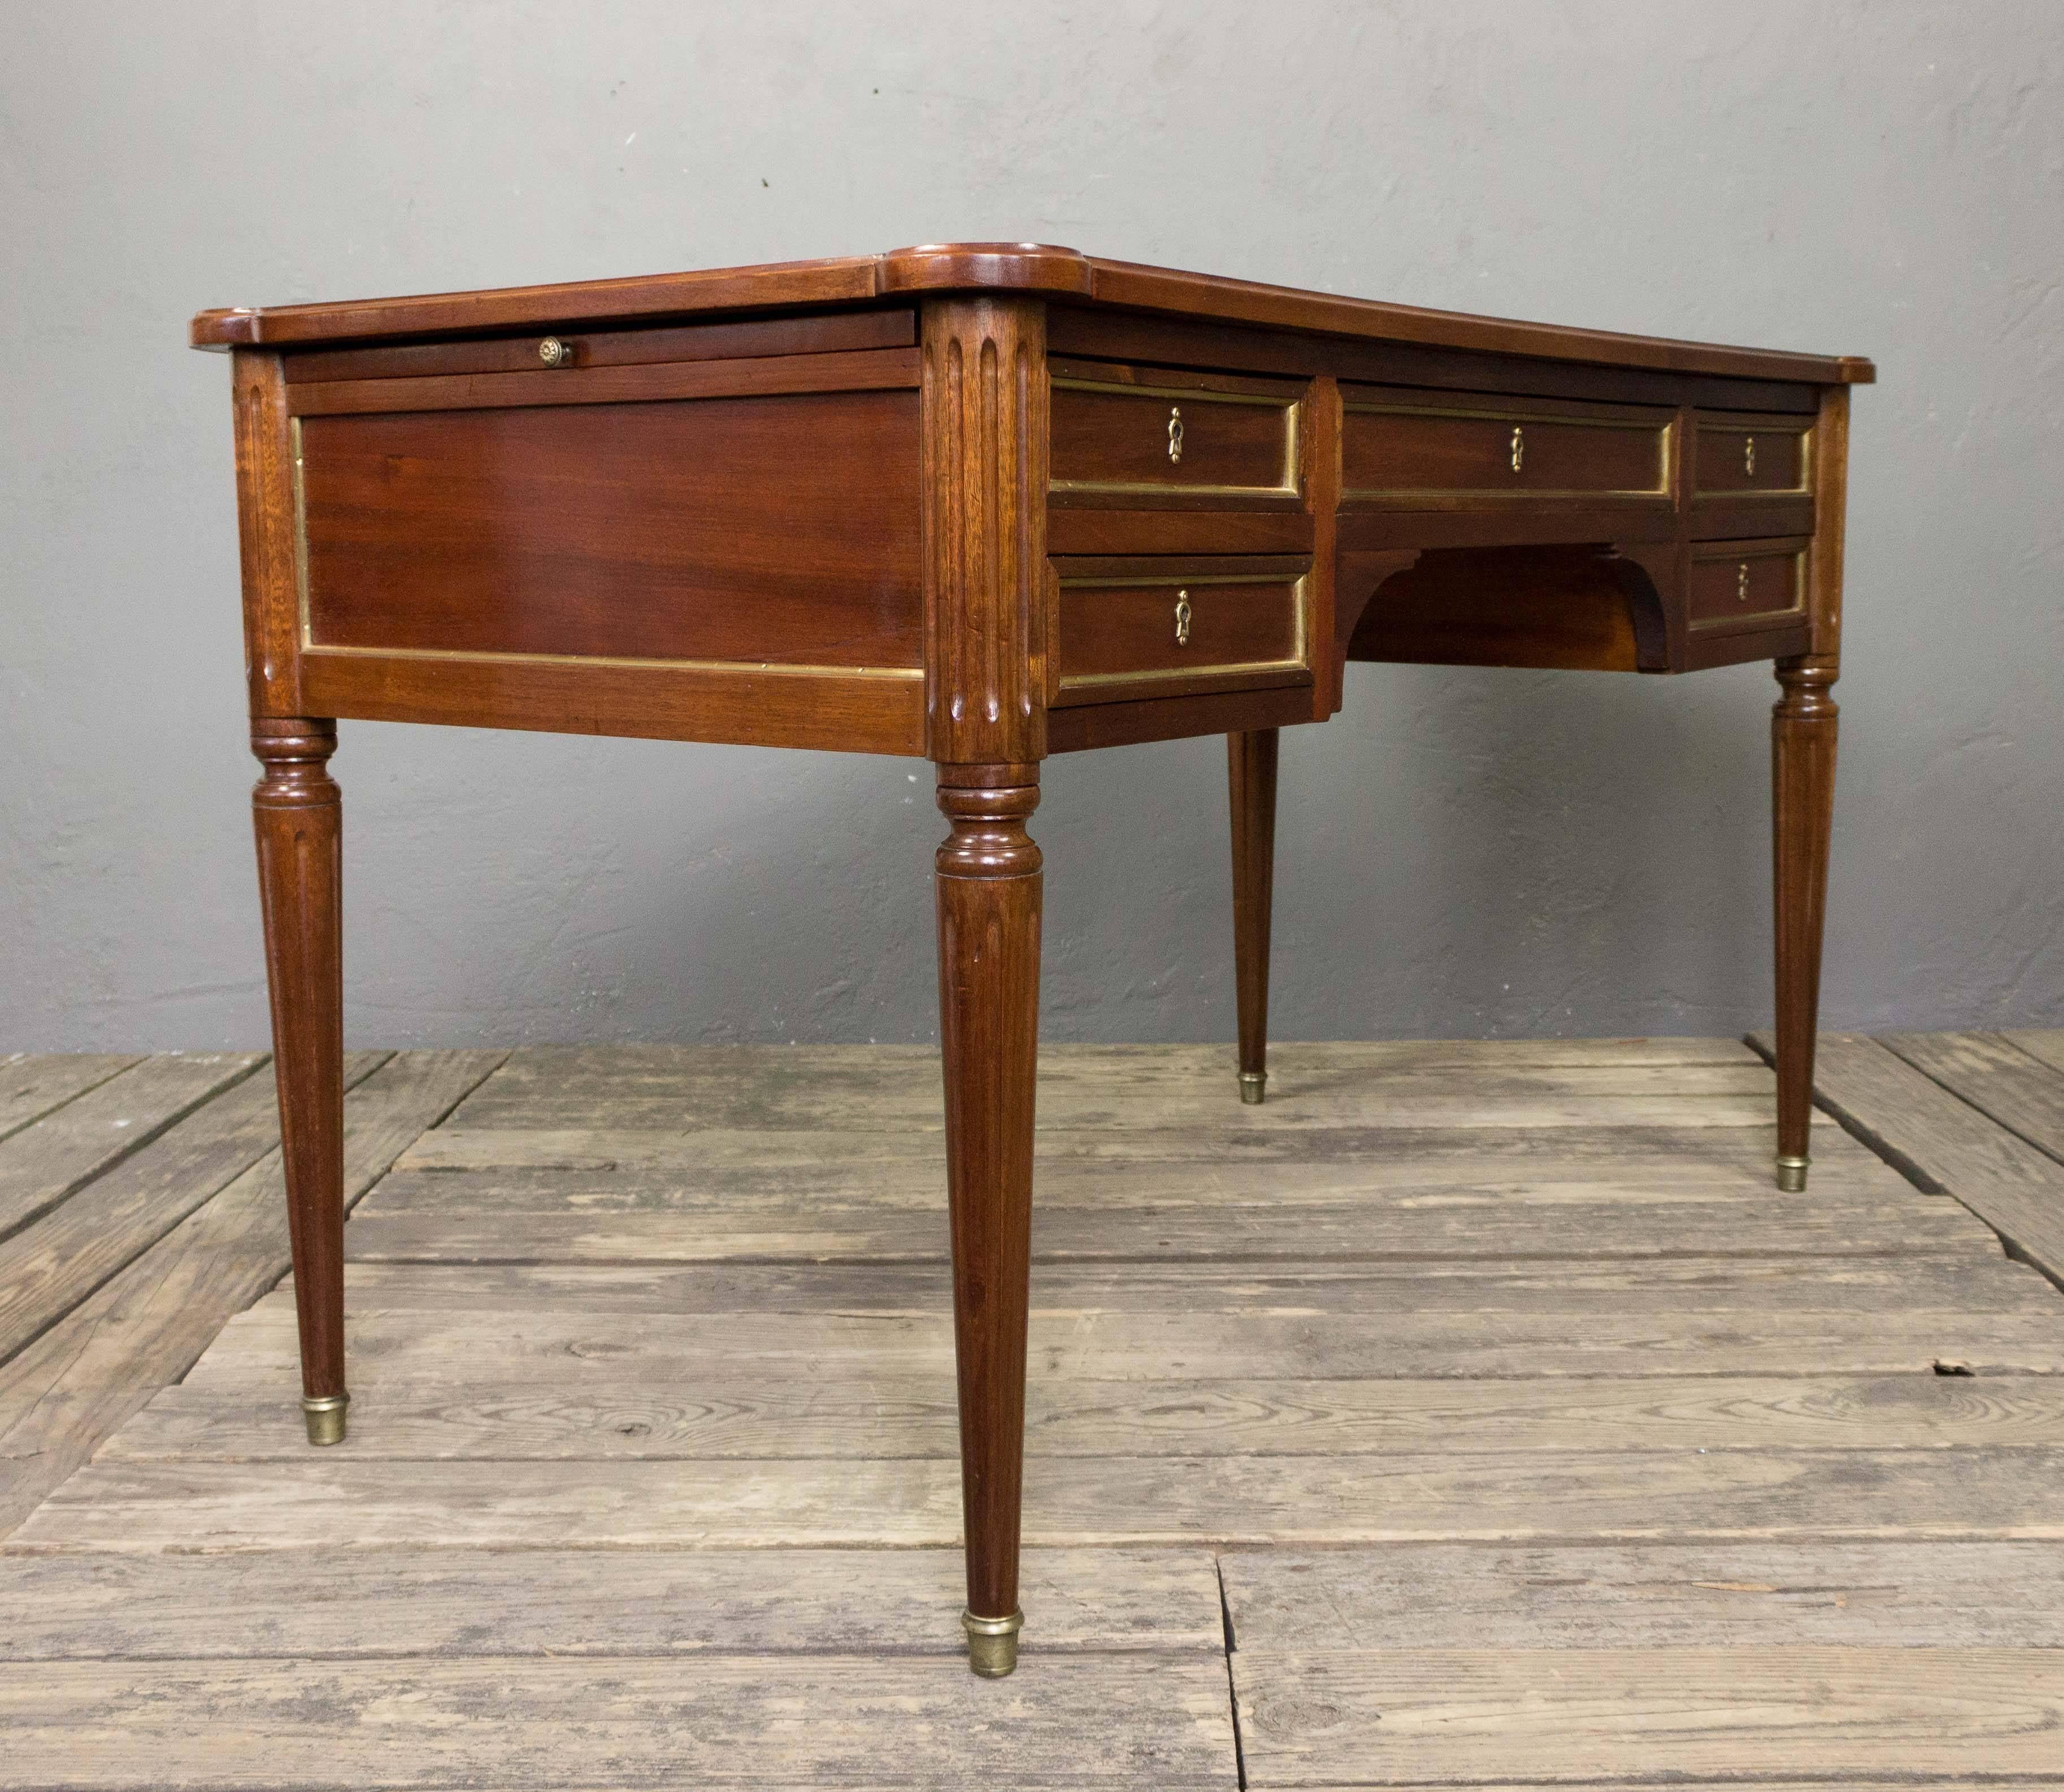 Handsome mahogany desk with leather top. The desk has five drawers and two pull-out tablets on either side. The back is finished so the deck can be seen from the backside.  Recently polished. France, Early 20th Century

